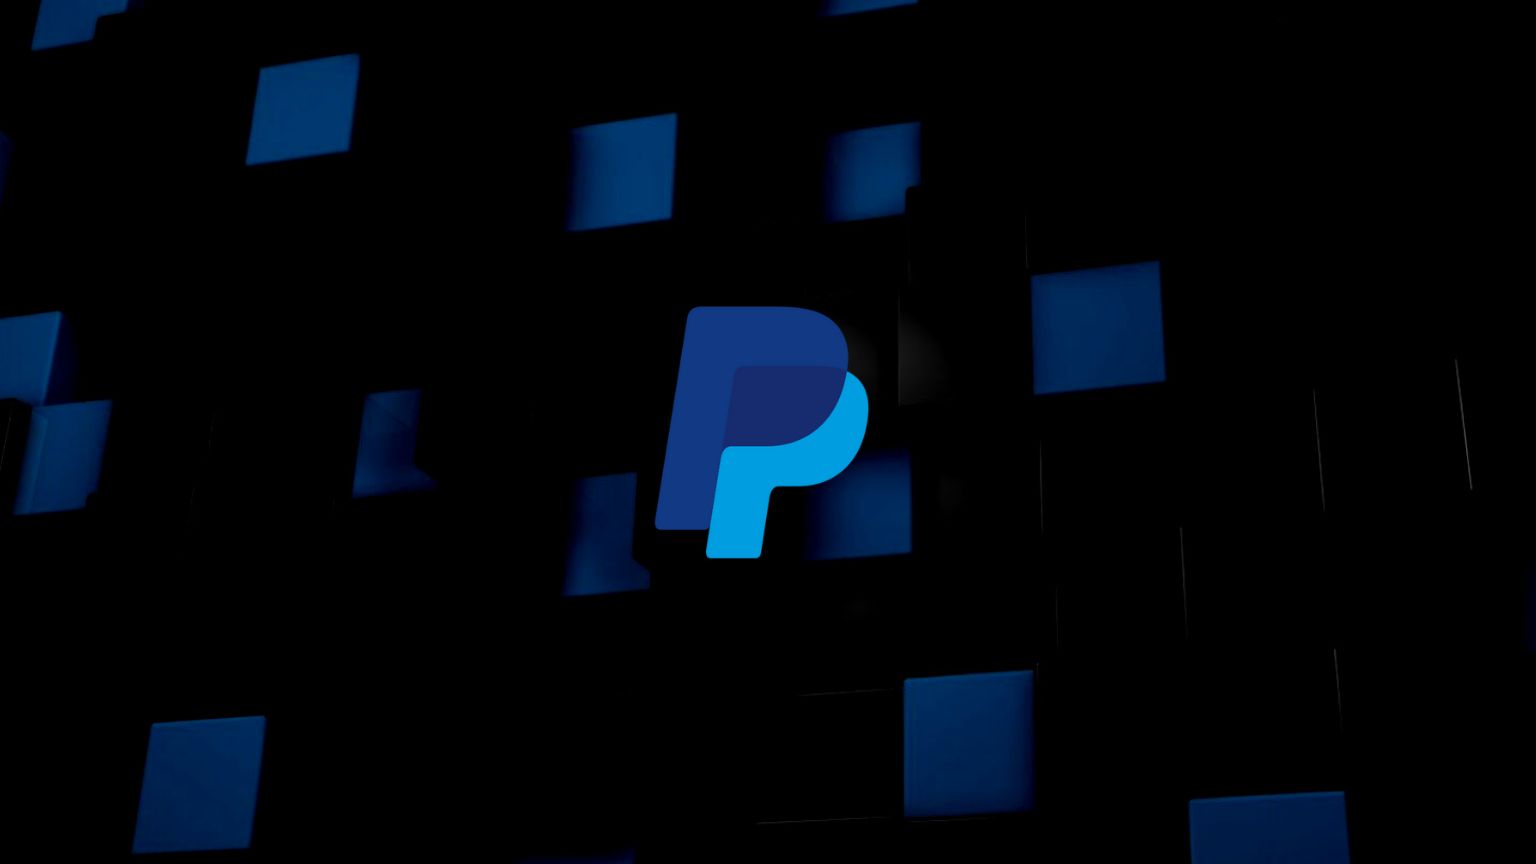 PayPal is sued for blocking accounts and keeping the funds